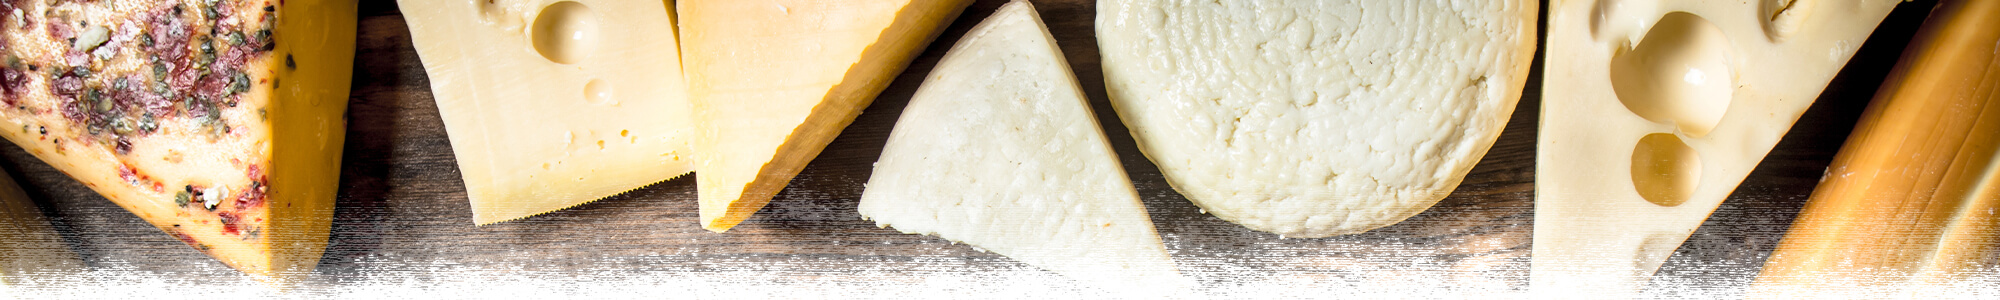 Small cheese manufacturers in Wisconsin